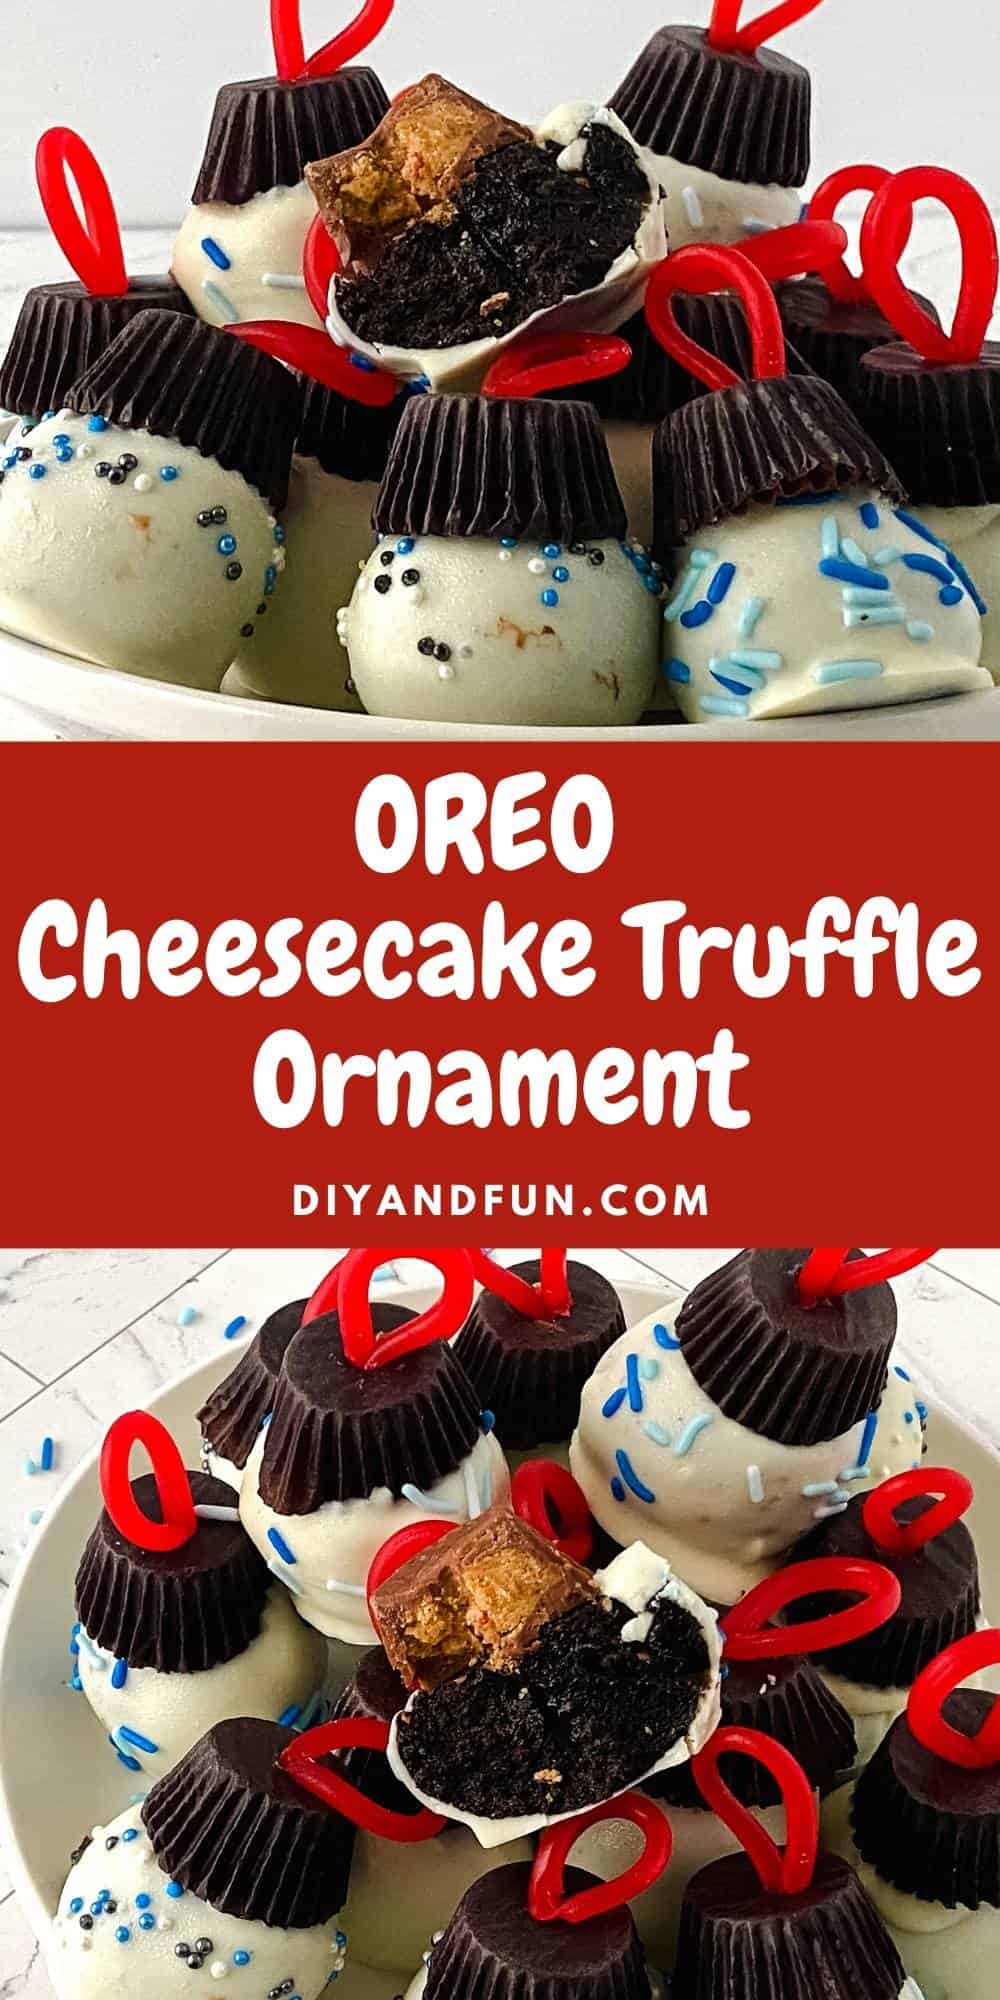 Oreo Cheesecake Truffle Ornament, an adorable and simple Christmas holiday recipe for truffles that look like ornaments.